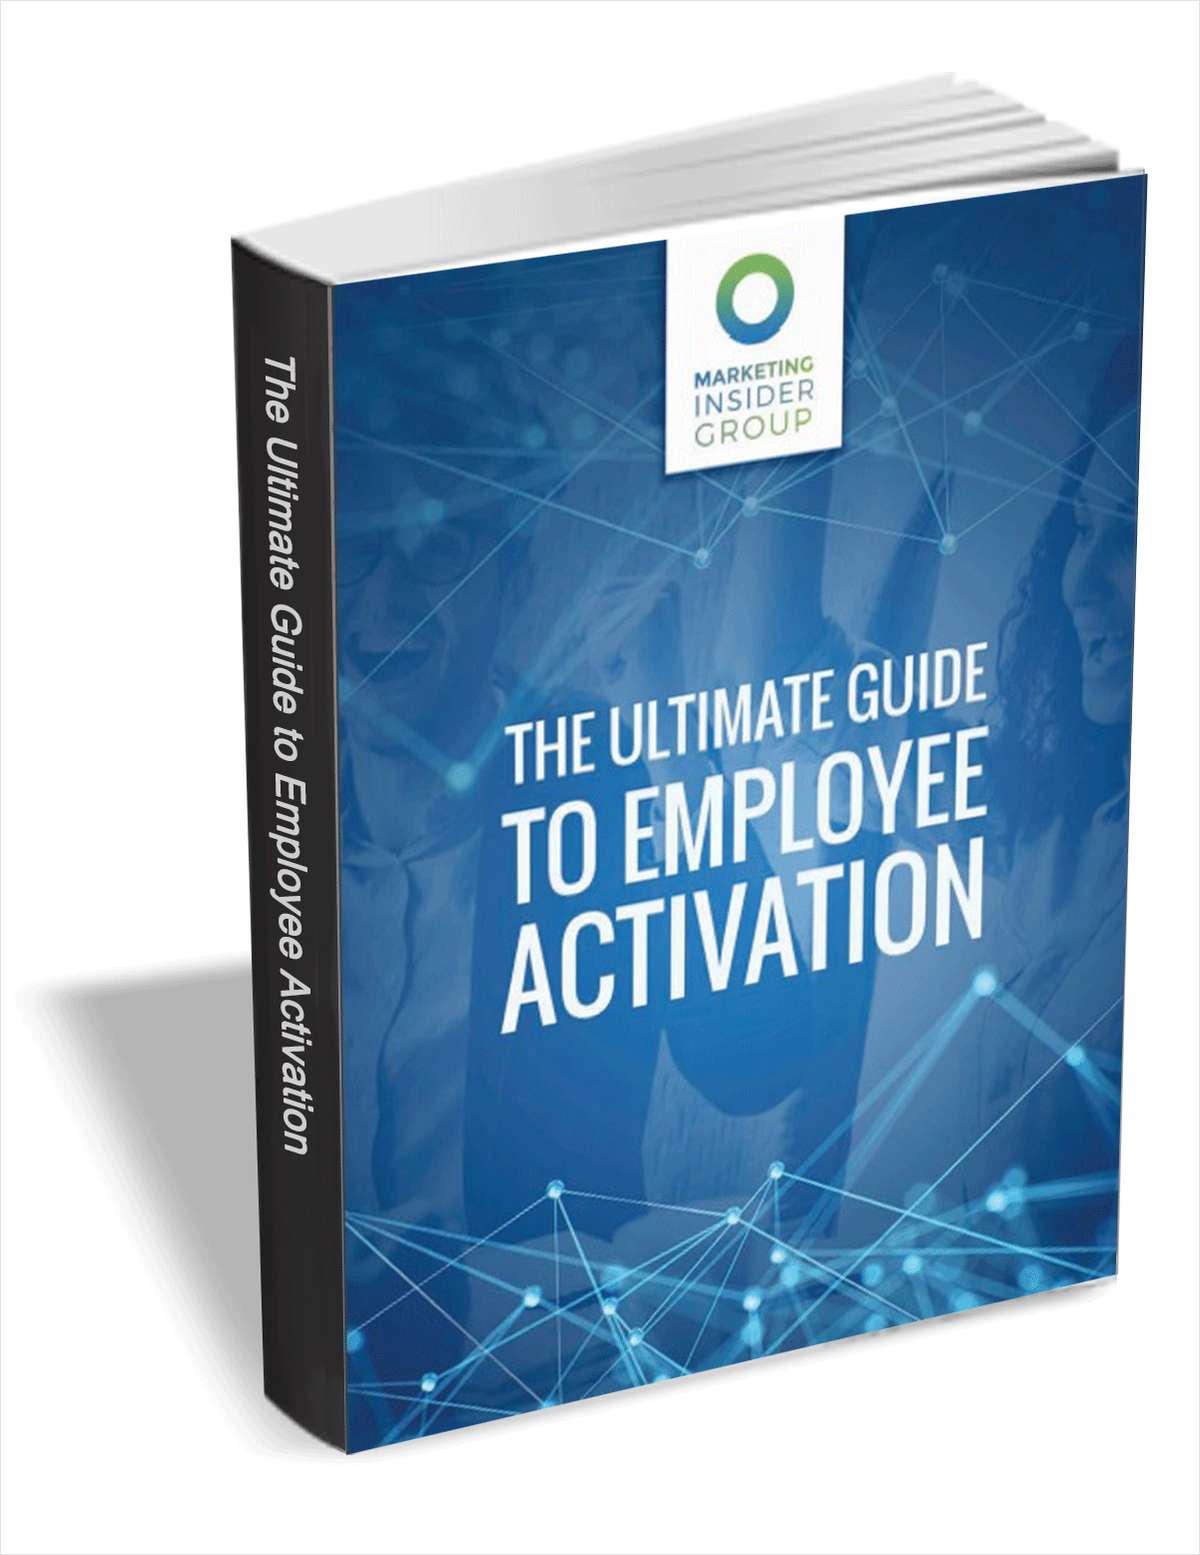 The Ultimate Guide to Employee Activation